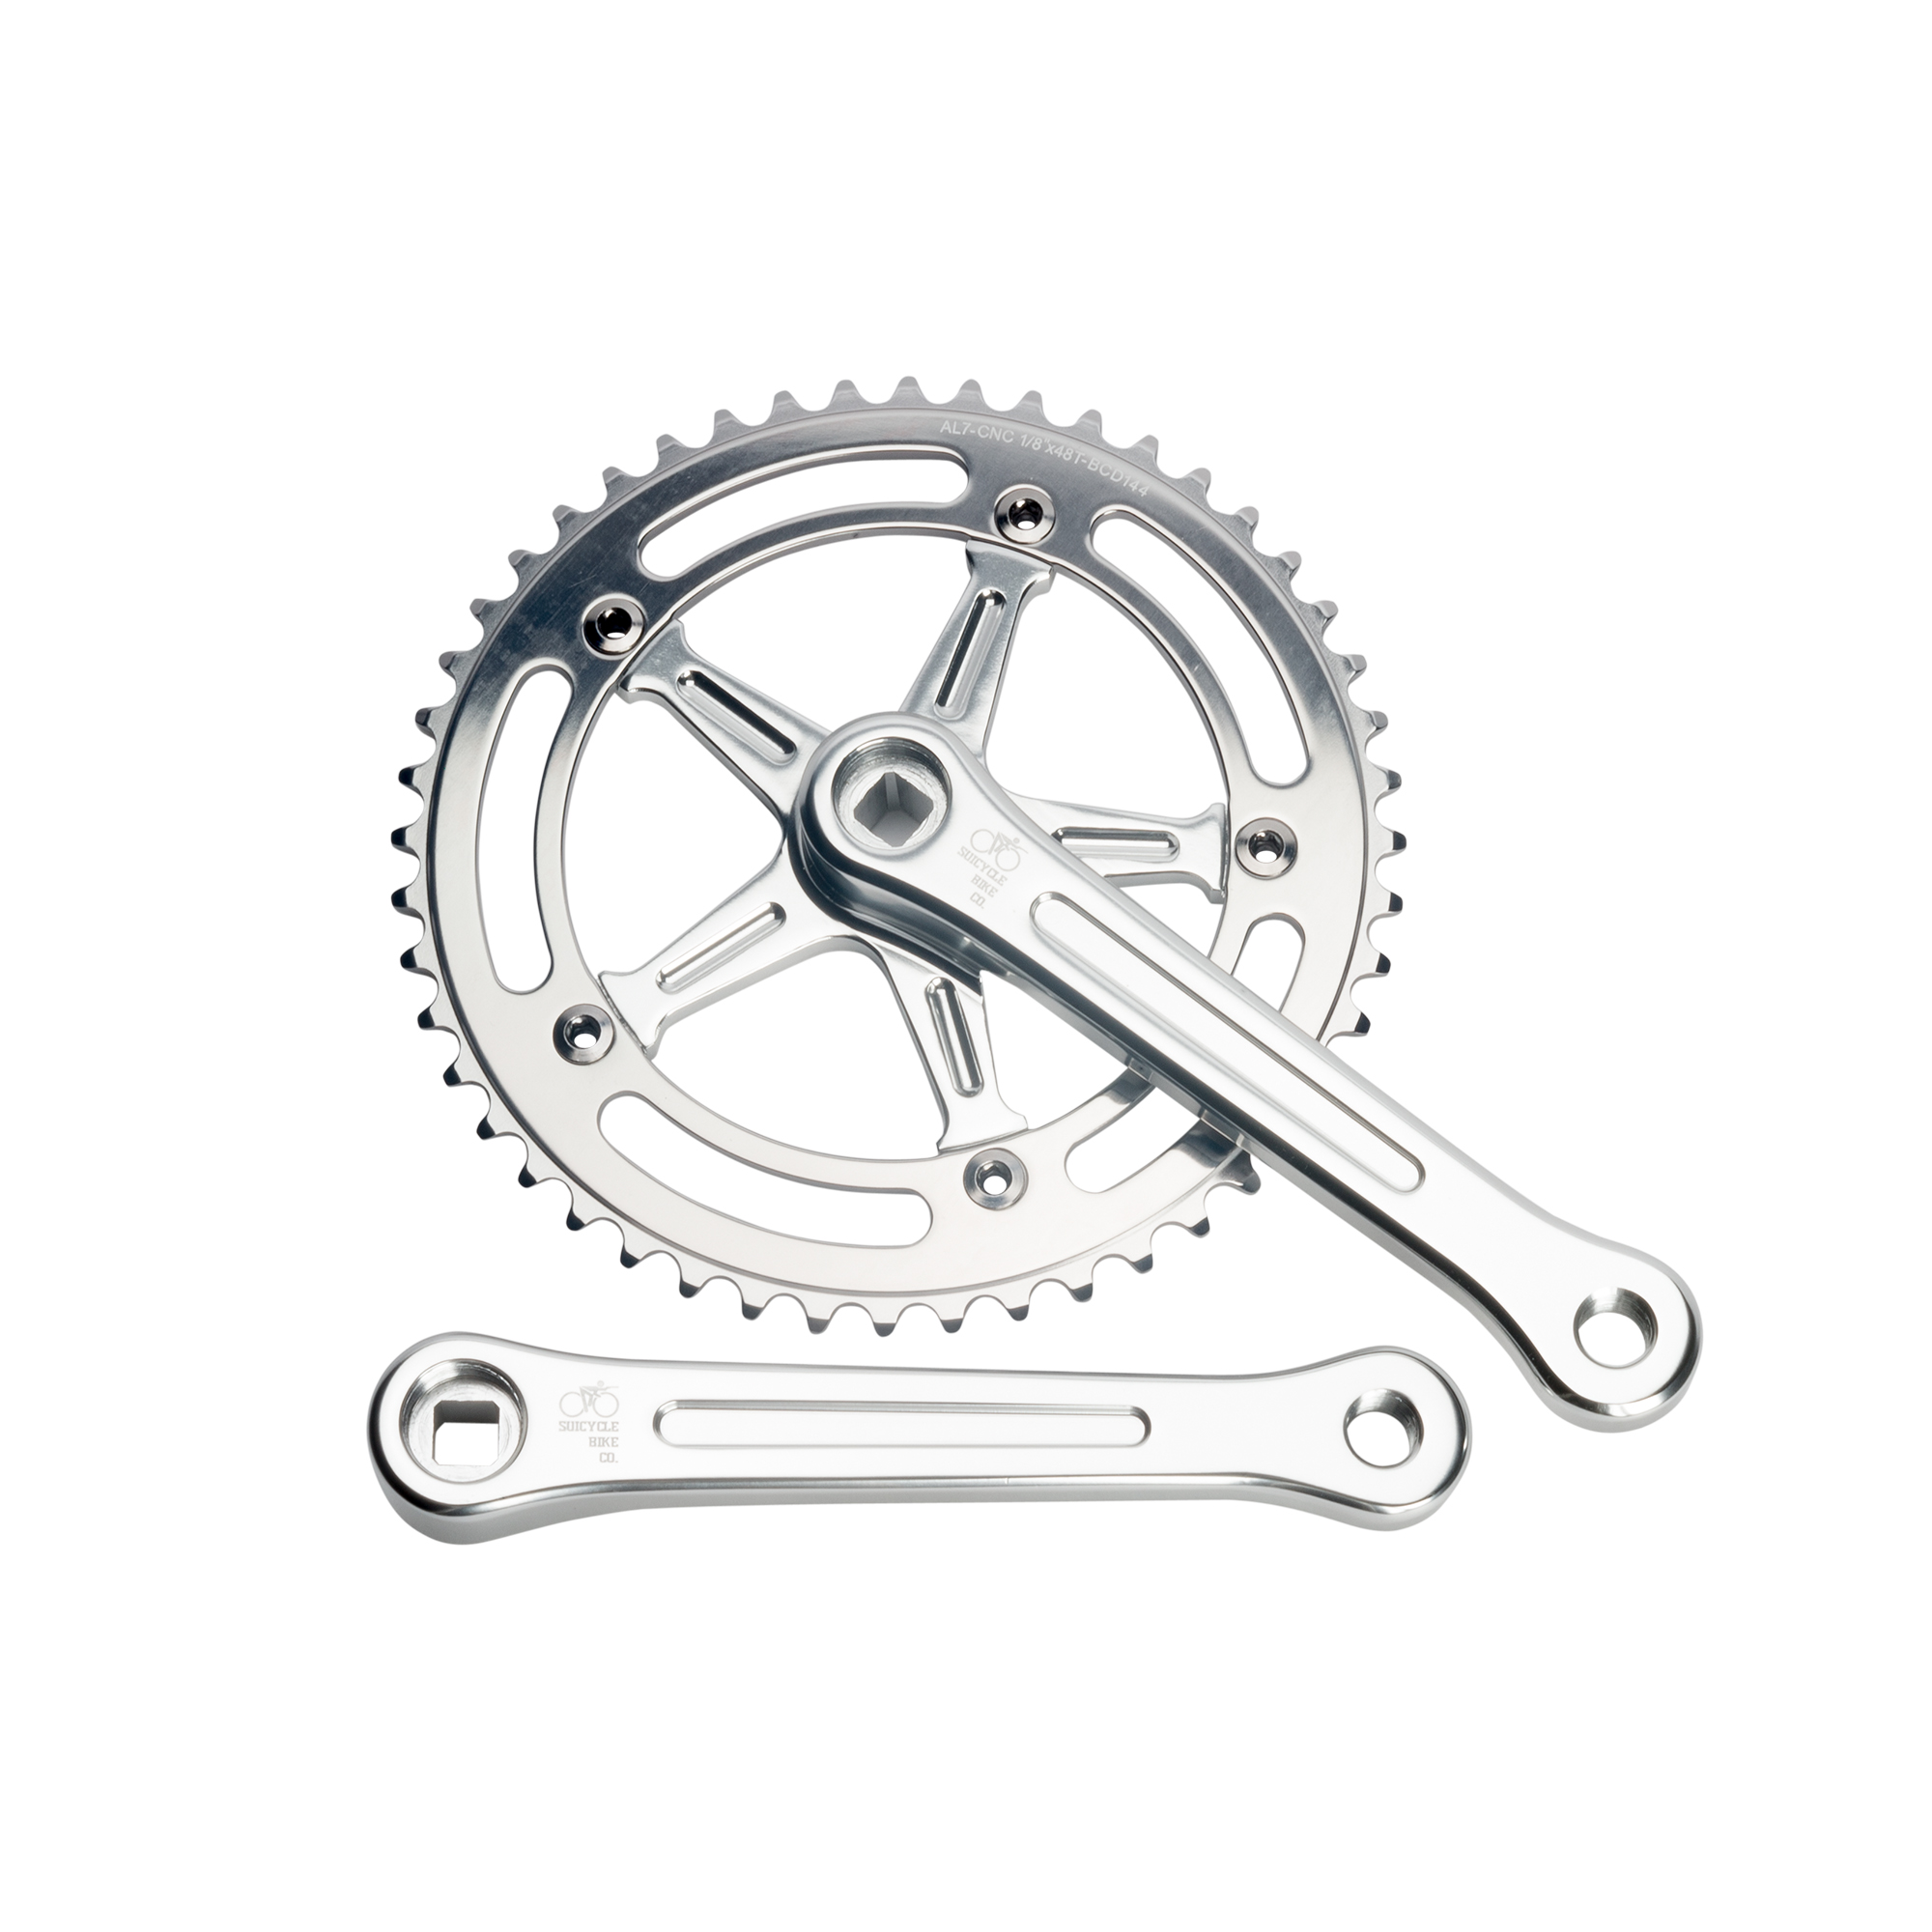 Suicycle - Classic.Crank Silver - SUICYCLE STORE